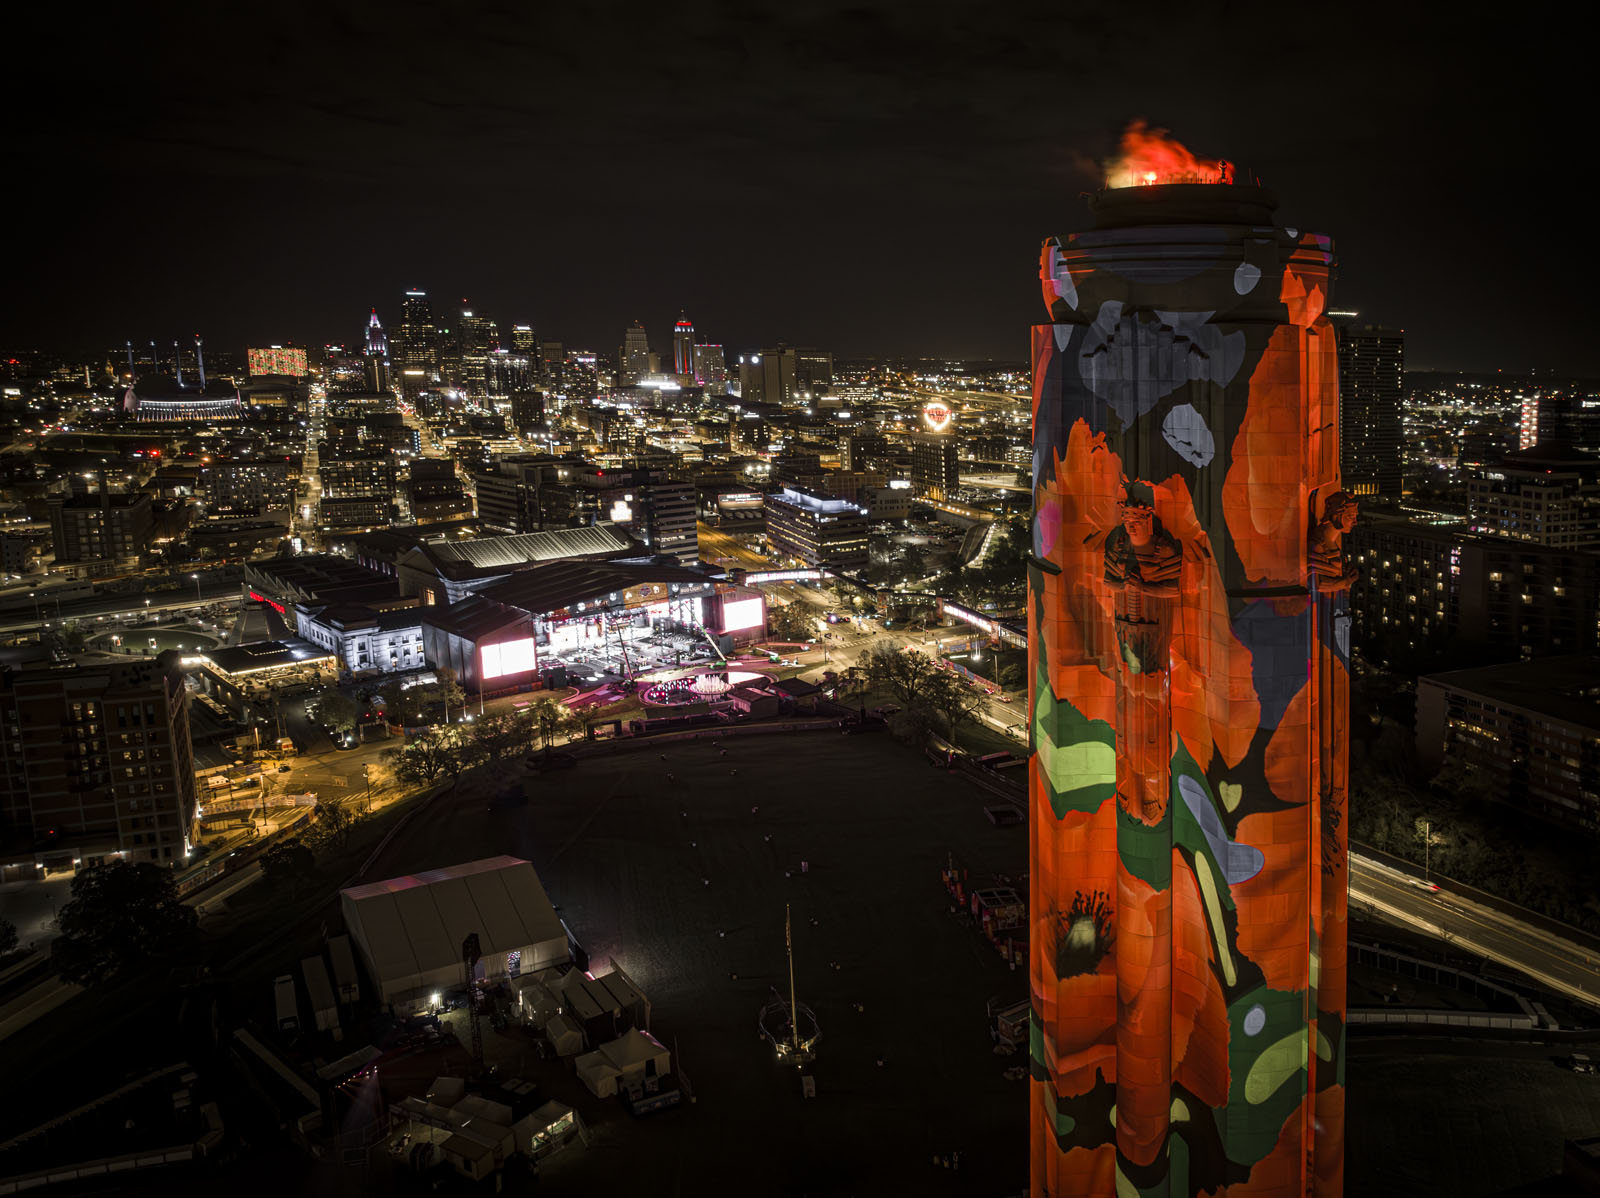 Modern photograph taken high in the air about level with the top of the Liberty Memorial Tower. The Tower is in the foreground with the carved stone guardians visible, covered in poppy projections. In the background, the NFL Draft Stage in front of Union Station is lit up.